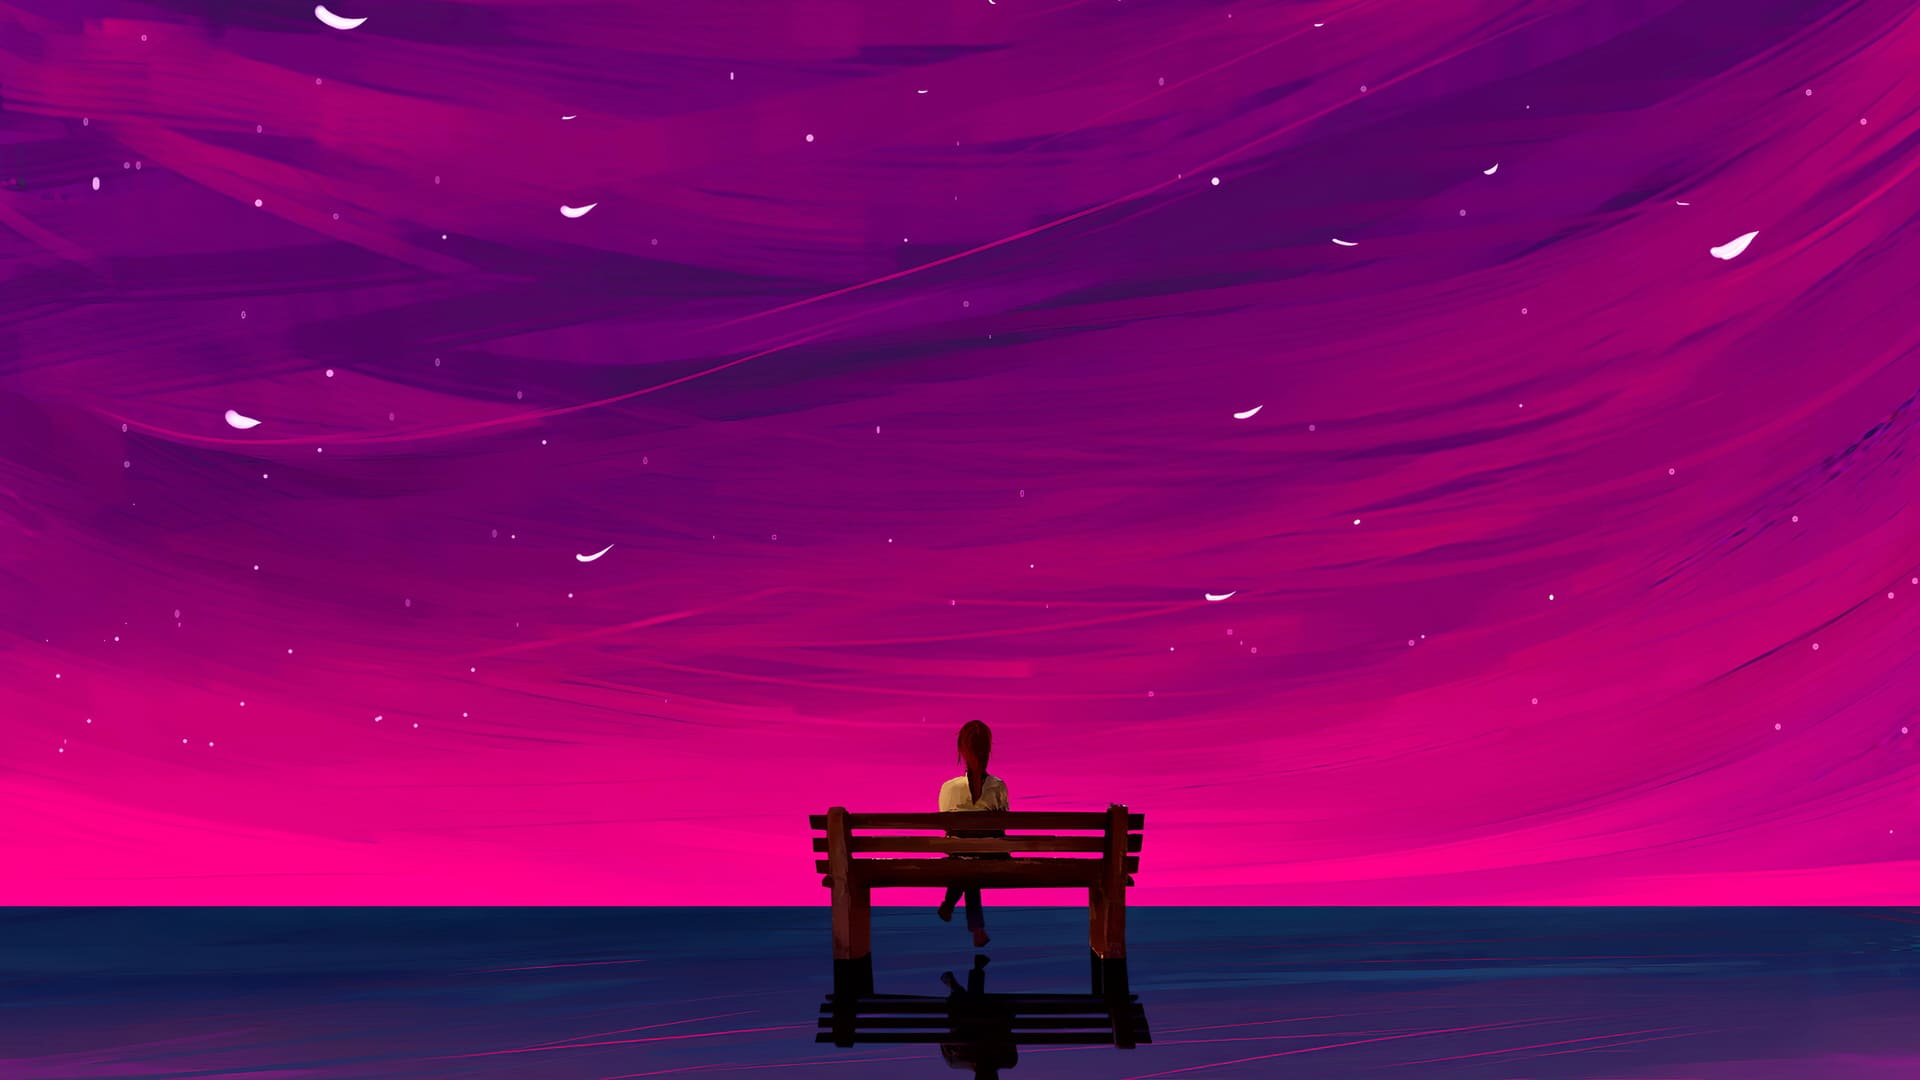 Alone Wallpapers - Top 65 Alone Backgrounds Download